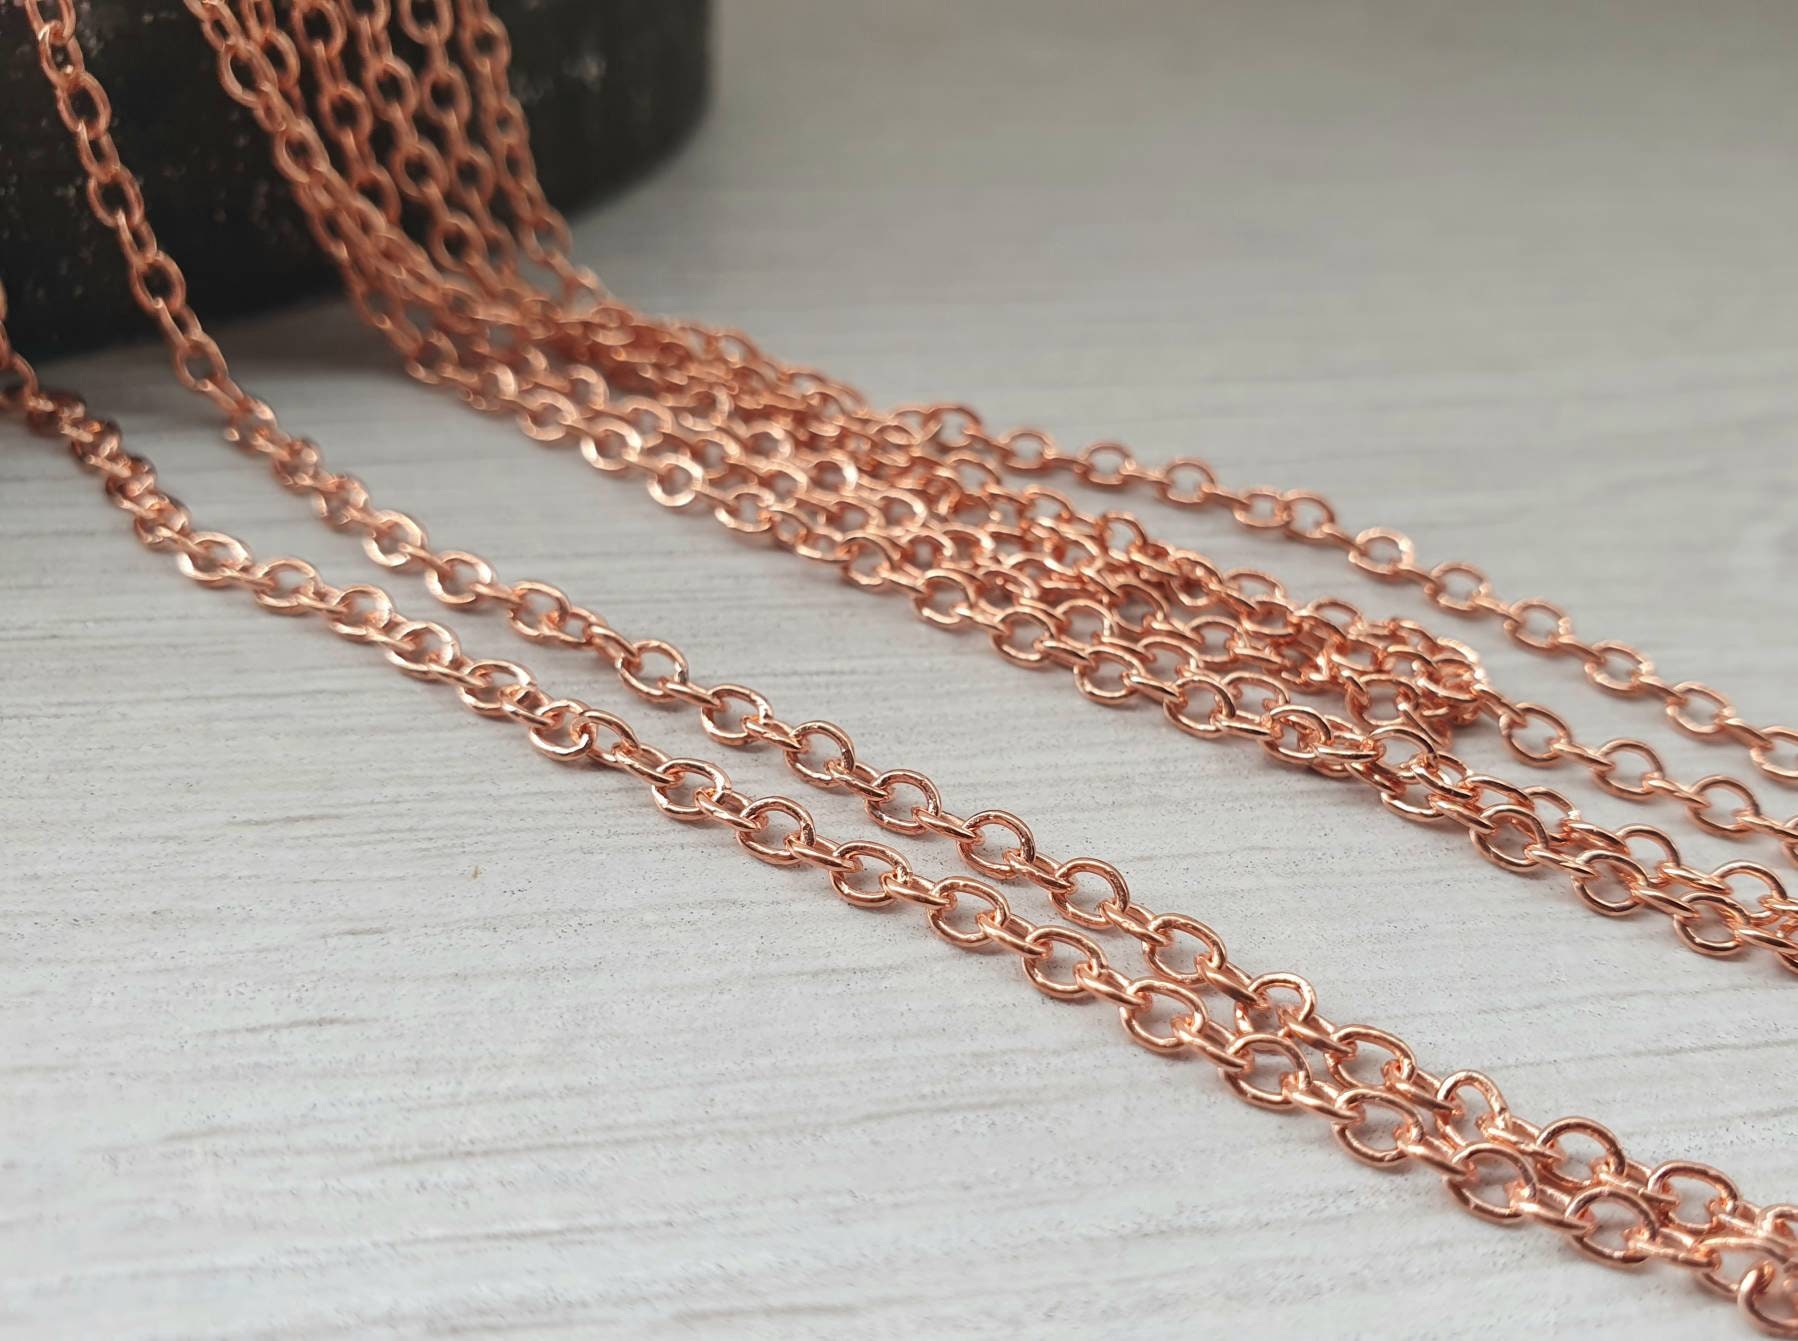 Solid Copper Necklace Chains Bead Chain Necklace Set NC22 Fine Copper 2.4  mm Ball Chain Necklace Chains 24 Inch Chain Bulk Lot of 10